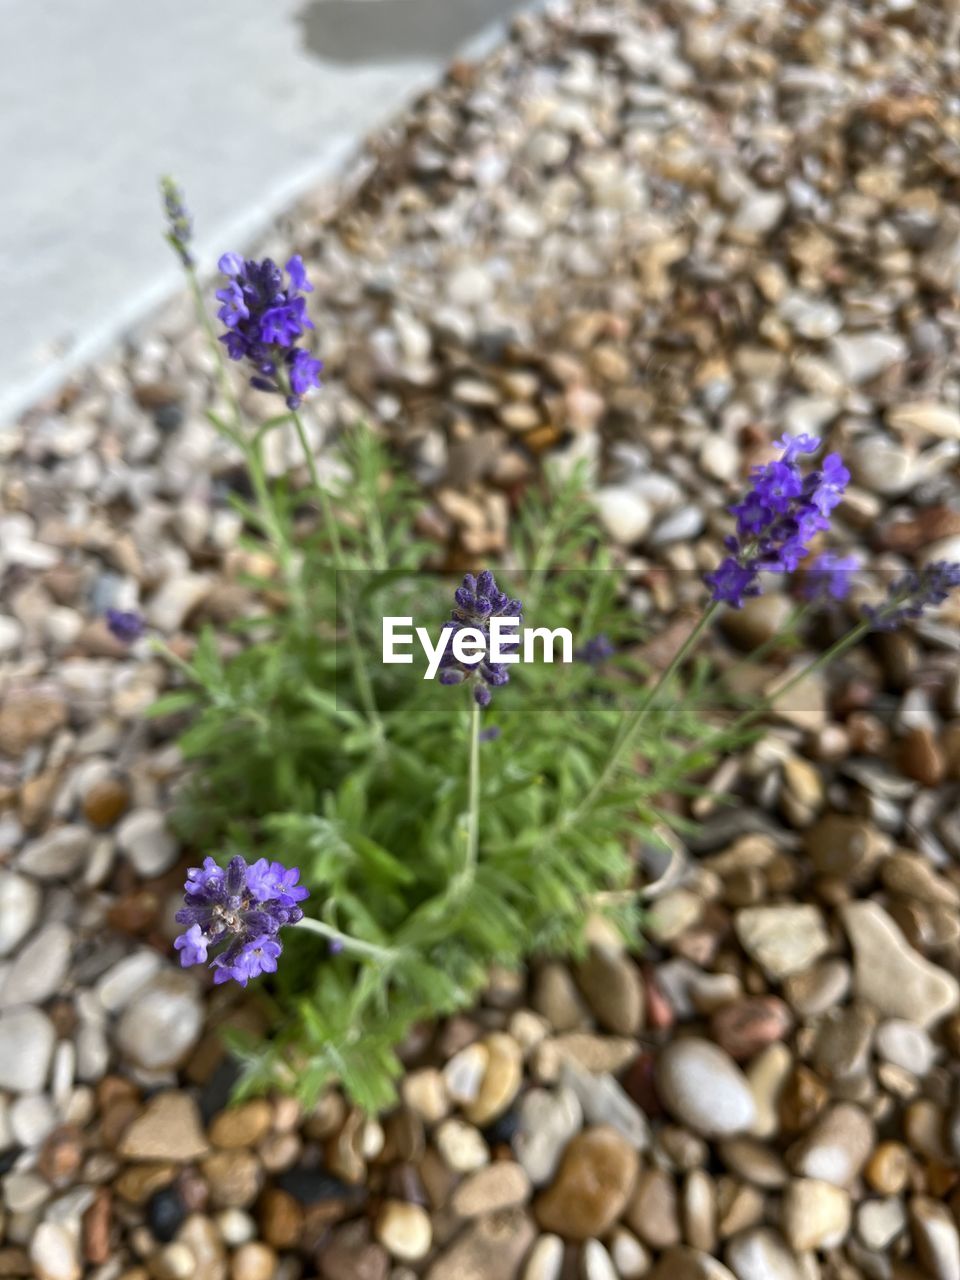 flowering plant, flower, plant, purple, beauty in nature, nature, freshness, lavender, fragility, close-up, day, no people, growth, flower head, rock, high angle view, inflorescence, outdoors, petal, focus on foreground, botany, wildflower, stone, sunlight, blossom, herb, selective focus